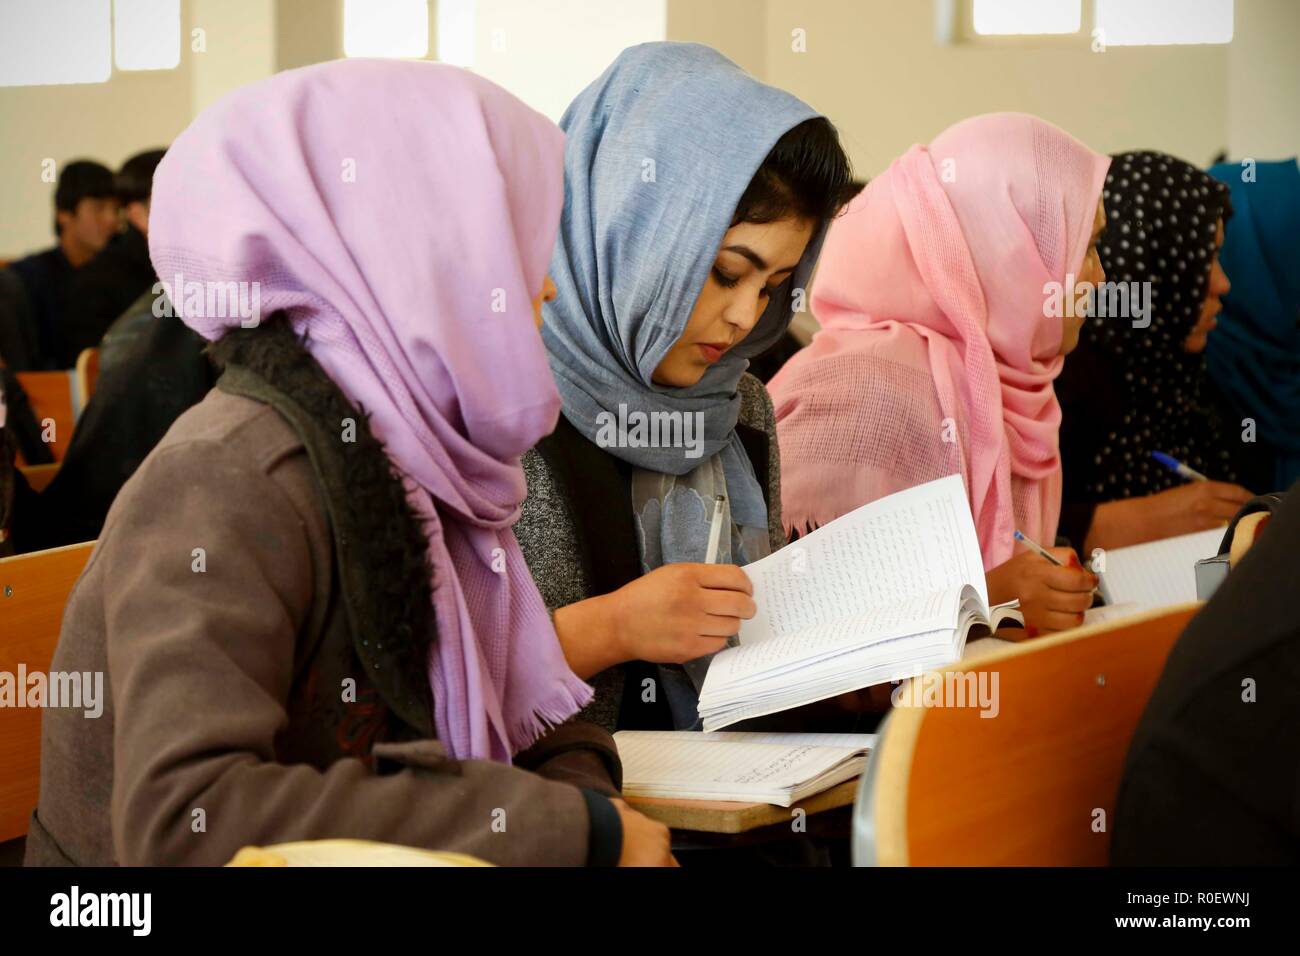 Bamiyan, Afghanistan. 4th Nov, 2018. University students attend a class at Bamiyan University in Bamiyan province, central Afghanistan, Nov. 4, 2018. Established around two decades ago, but shut down by the Taliban outfit in 1997, after the armed outfit overran Bamiyan province, Bamiyan University was reopened in 2003 and since then has been serving as the main higher educational center in the highland region of Afghanistan. TO GO WITH Feature: More girls enroll in university in Afghanistan's Bamiyan province, post-grad job situation remains tight Credit: Noor Azizi/Xinhua/Alamy Live News Stock Photo